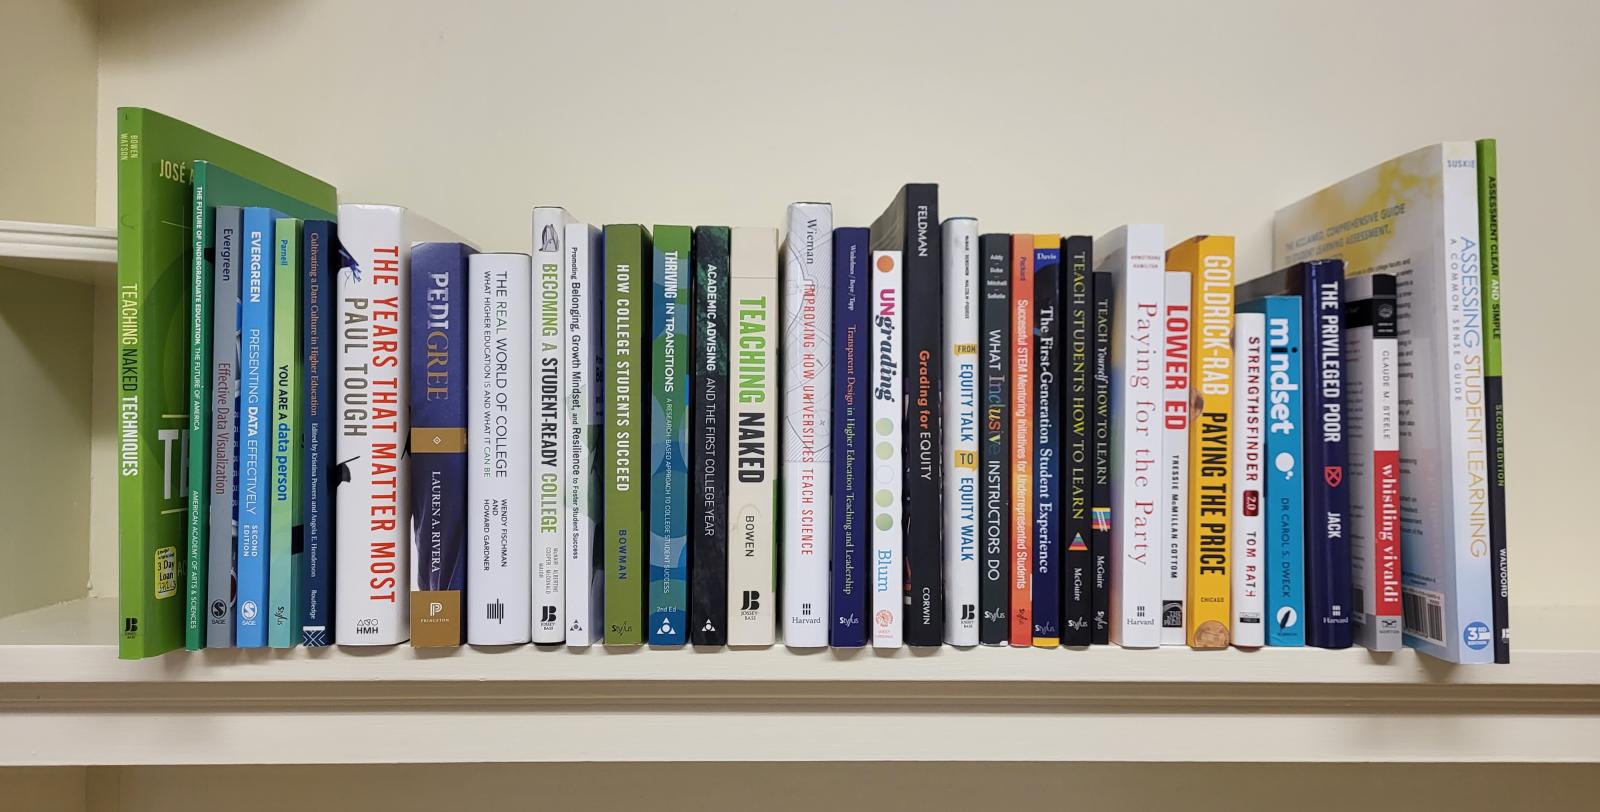 Institutional Research related books sitting on a bookshelf.